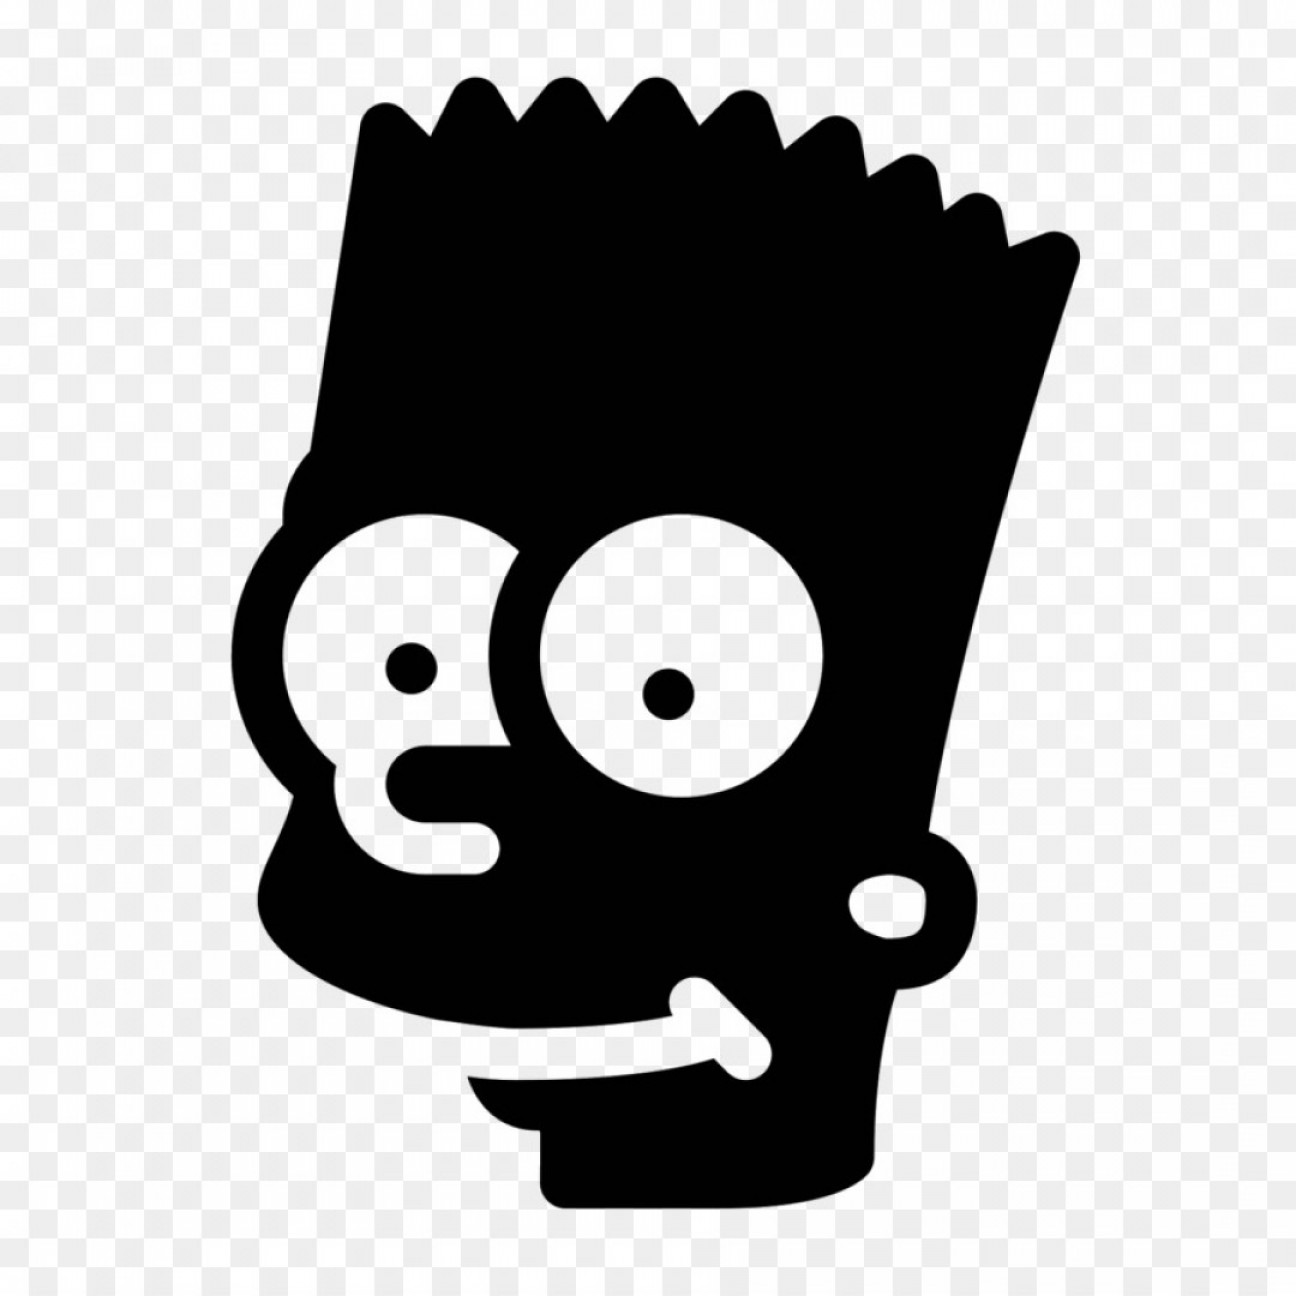 Simpsons black and.